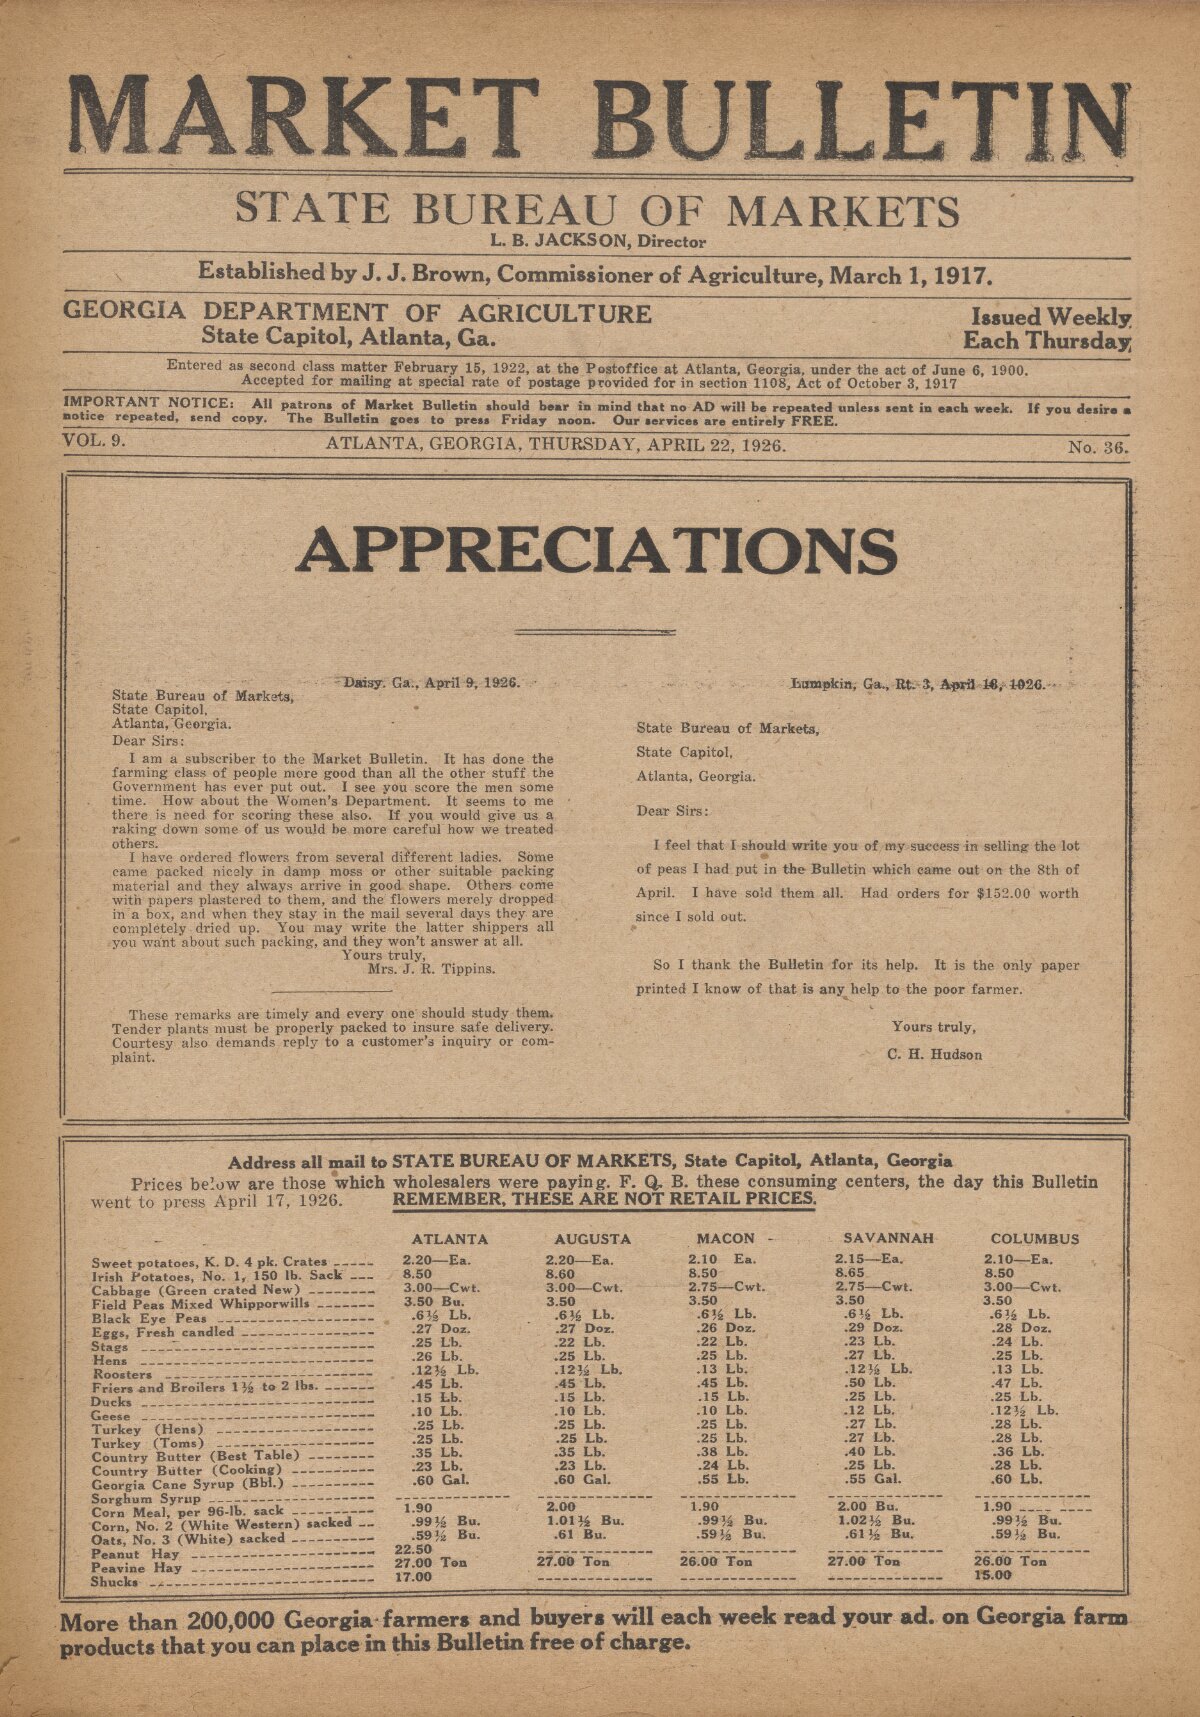 Farmers and consumers market bulletin, 1926 April 22 pic